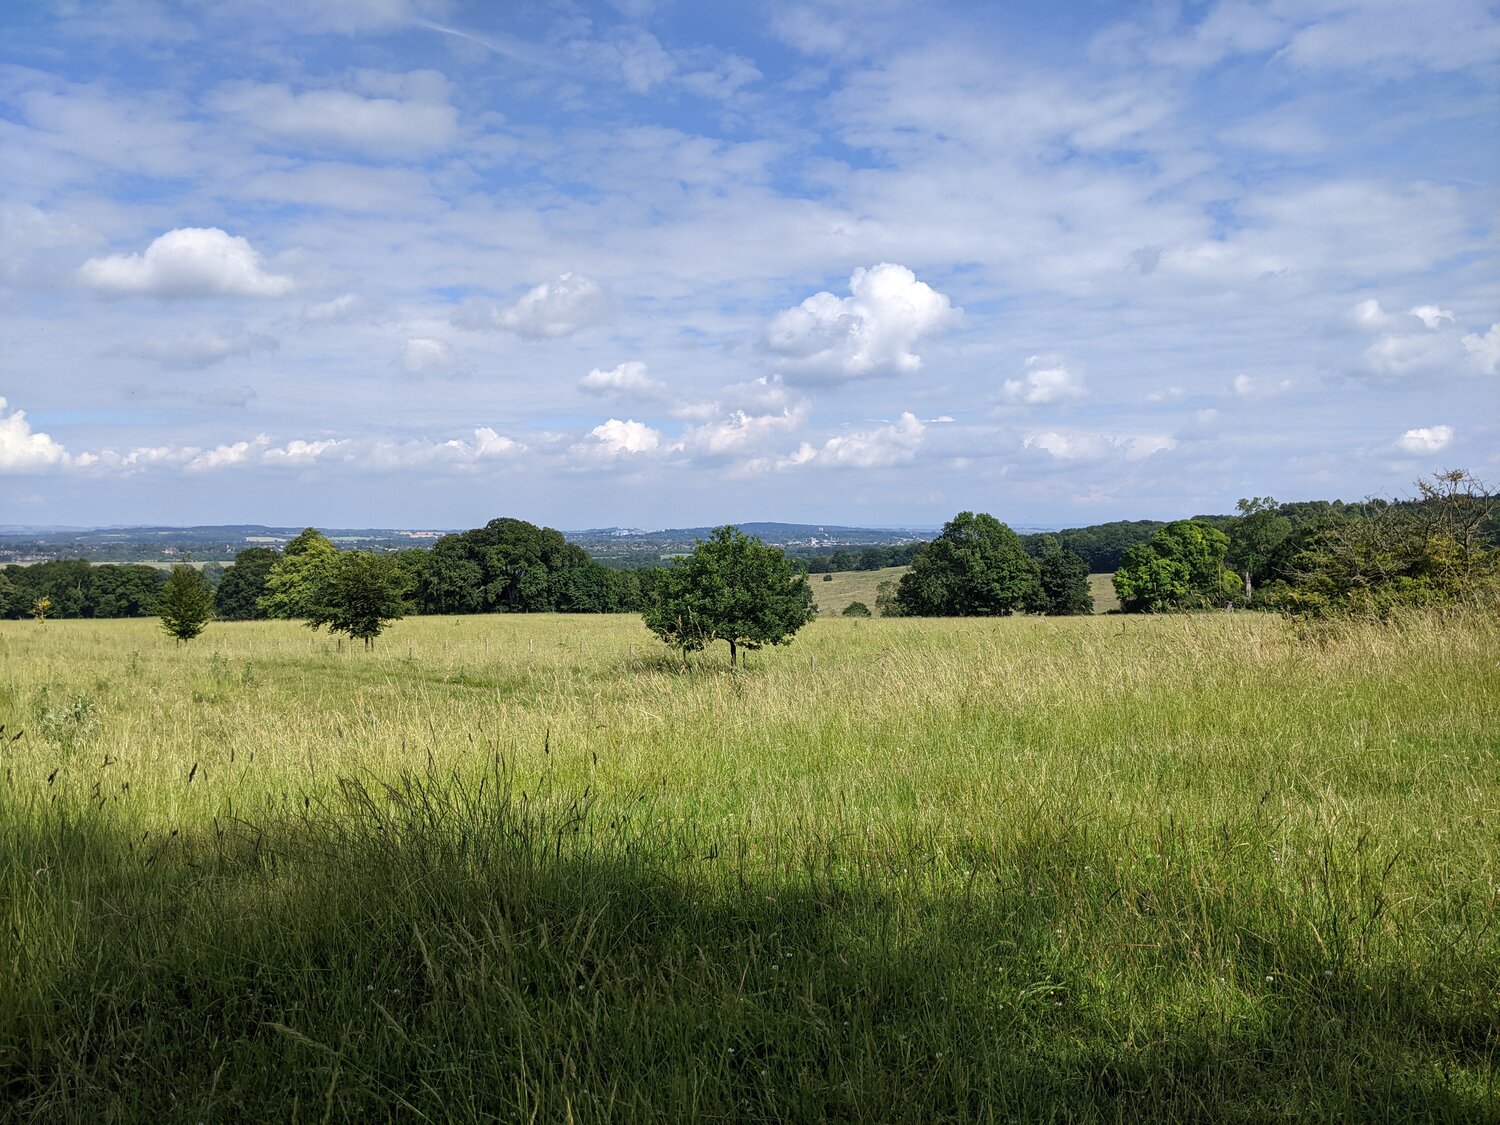 The view from Wytham Woods over Oxford